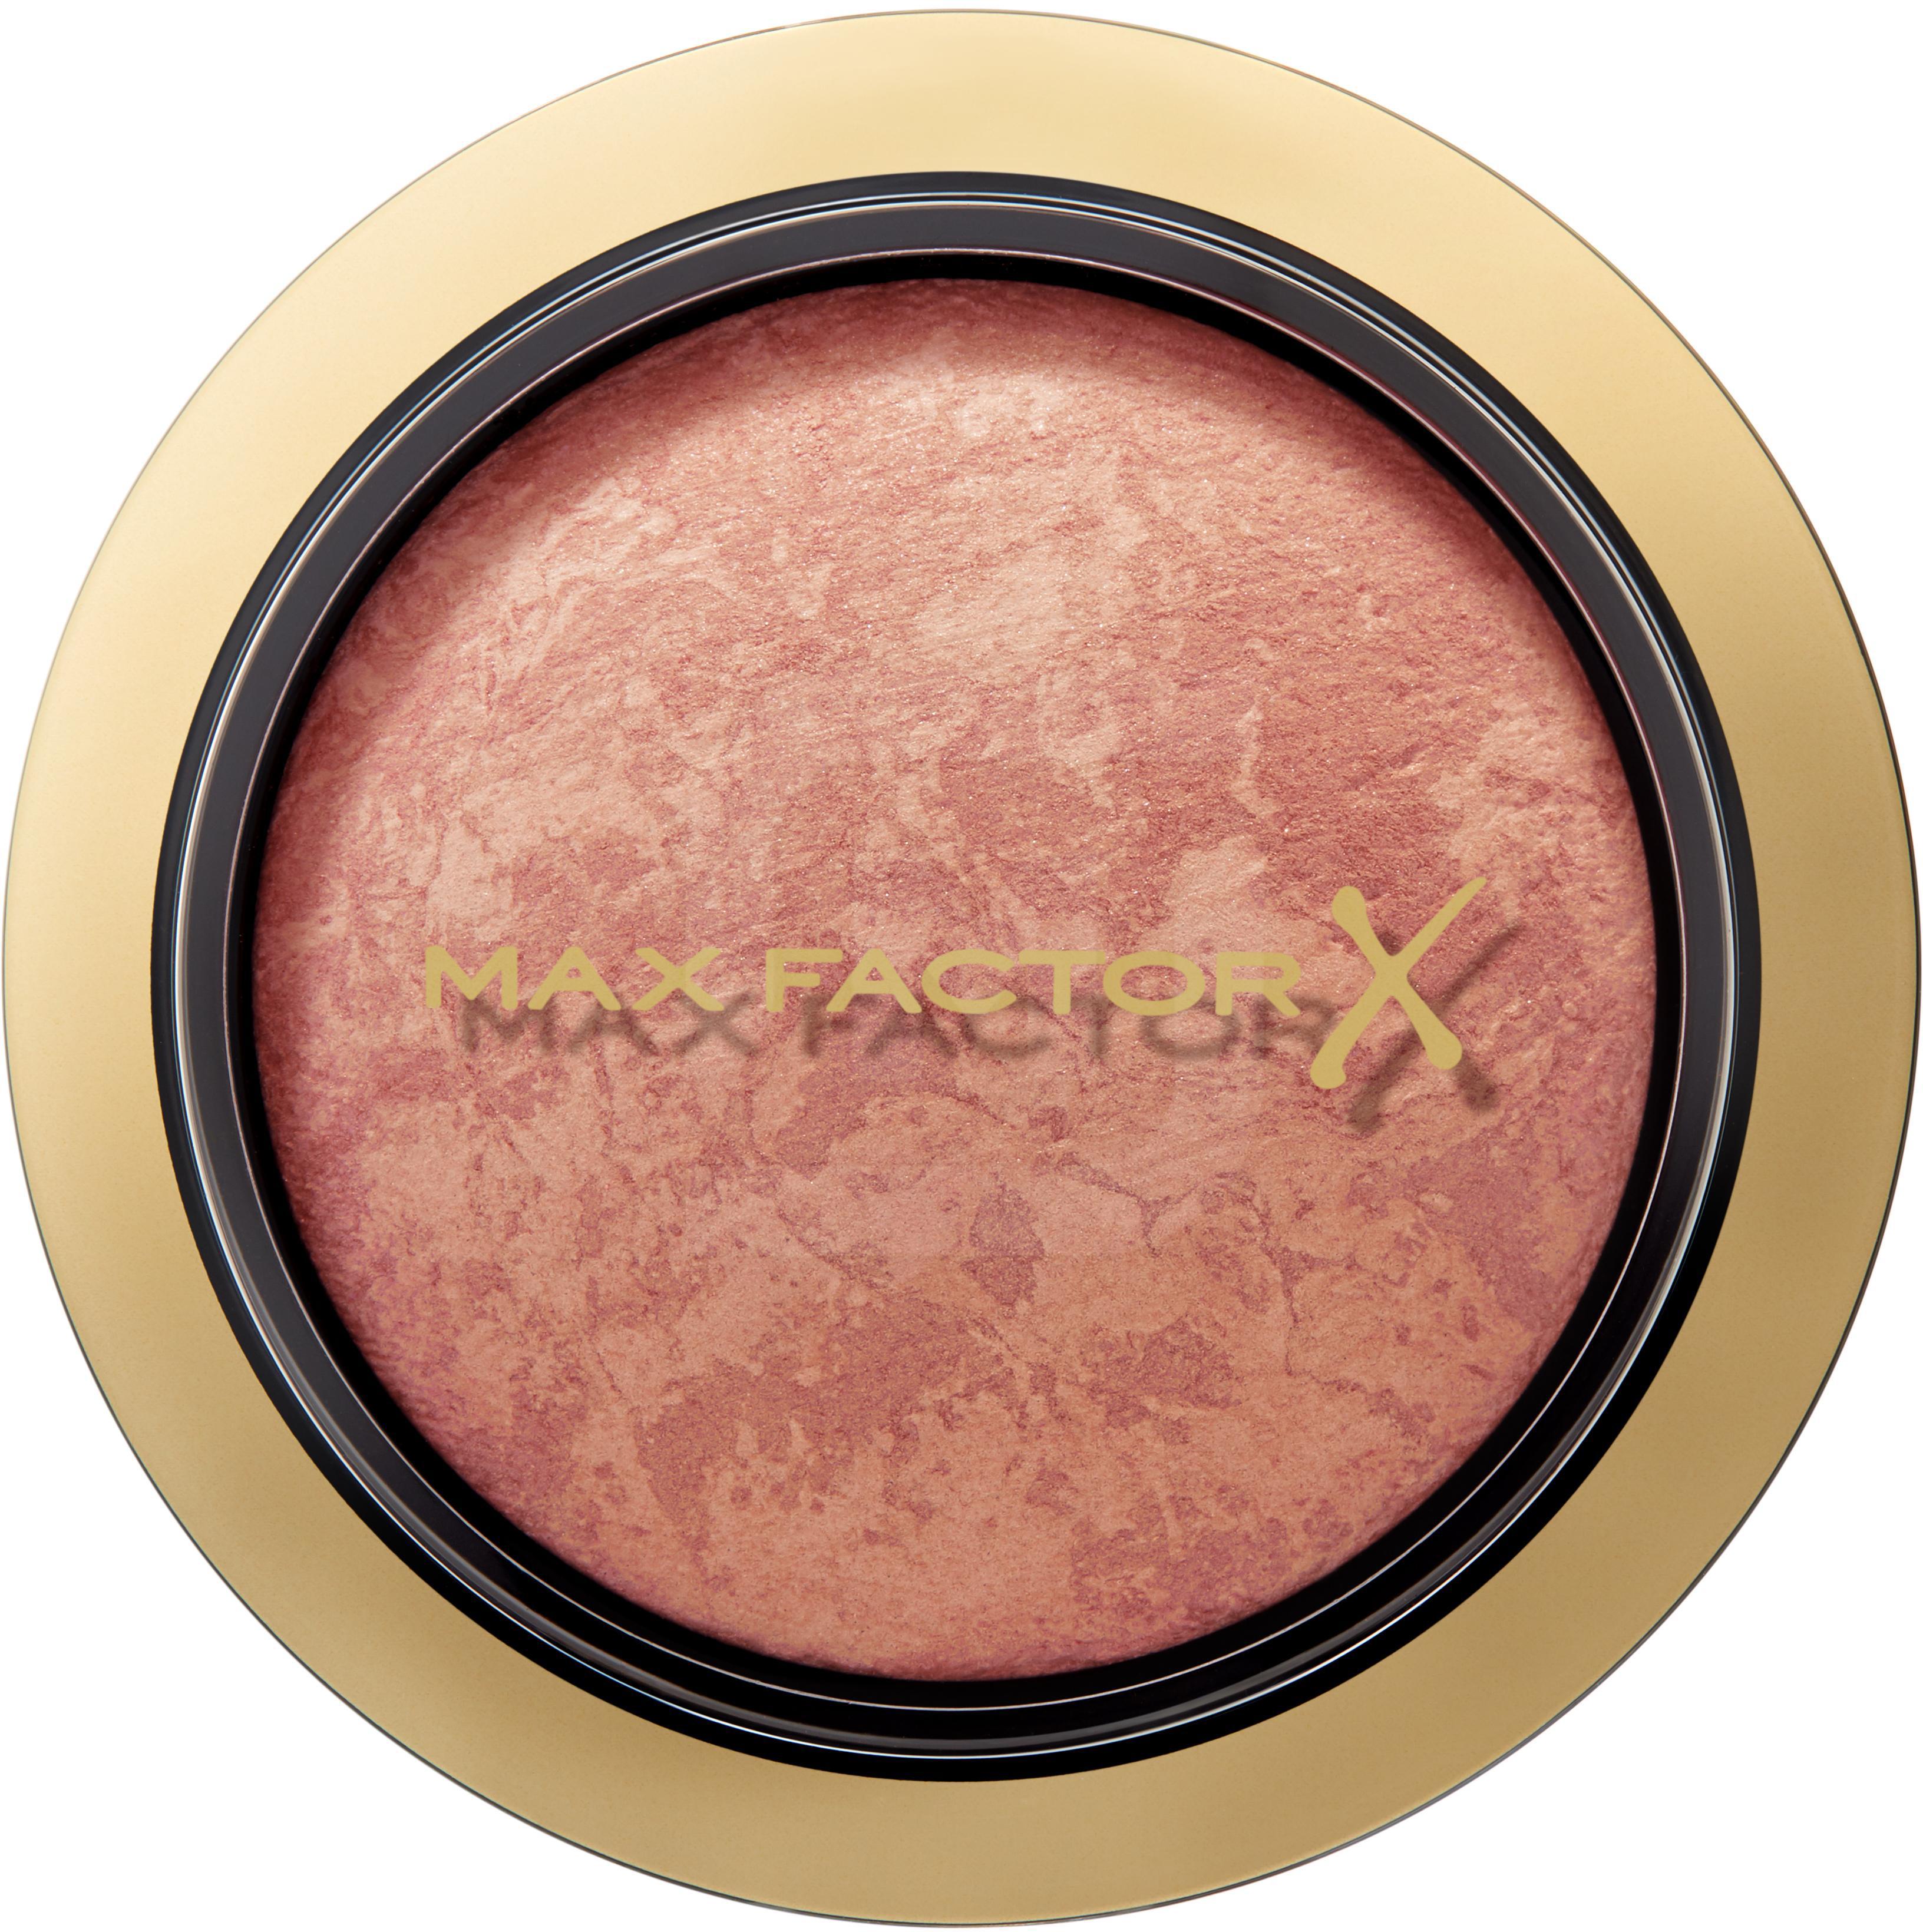 Румяна Max Factor Creme Puff розовые 2,5 г румяна max factor creme puff blush 05 lovely pink